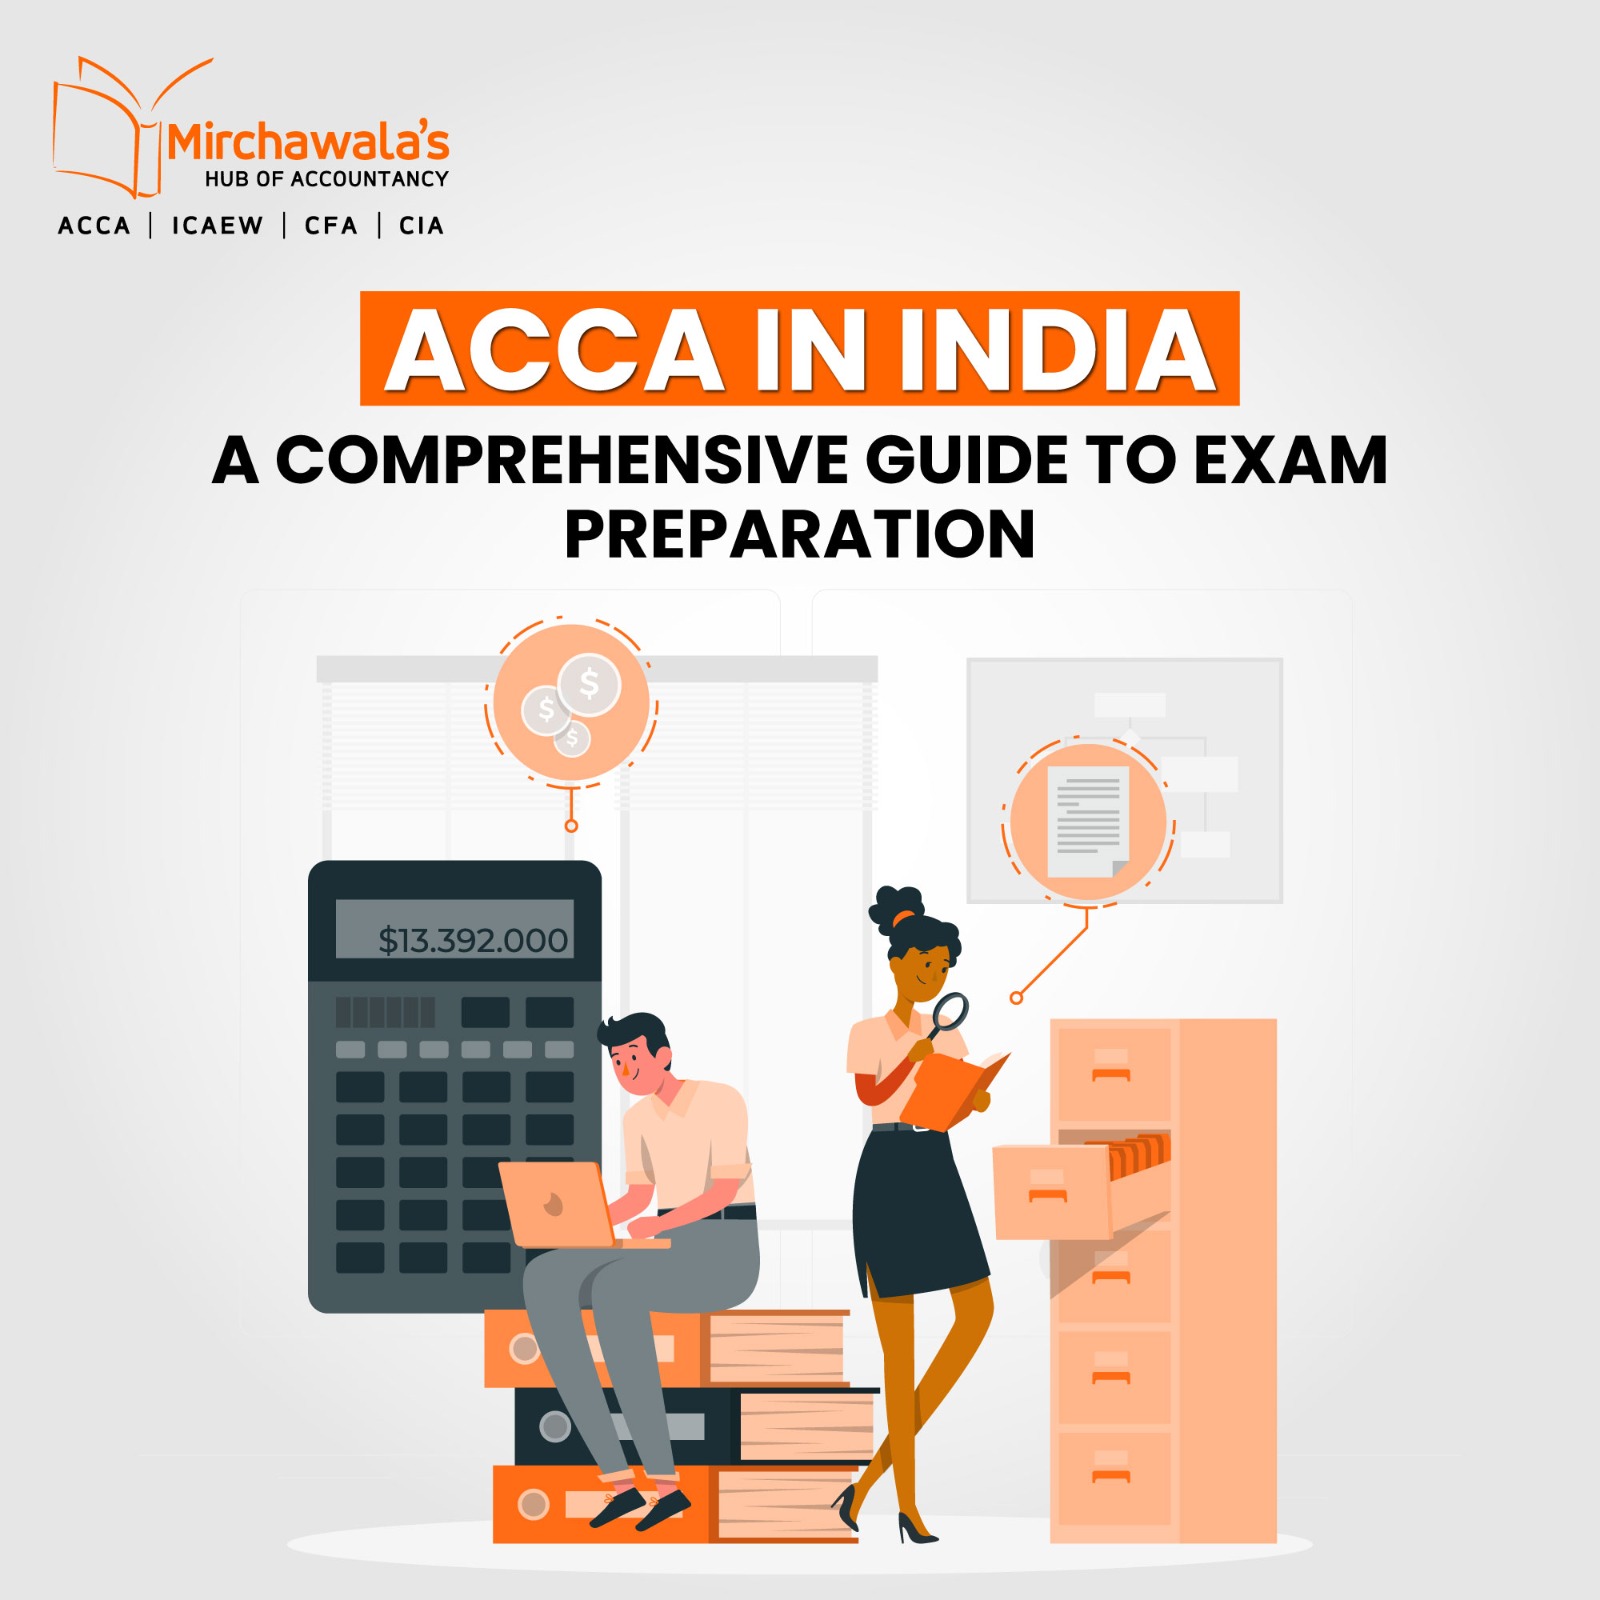 ACCA in India: A Comprehensive Guide to Exam Preparation